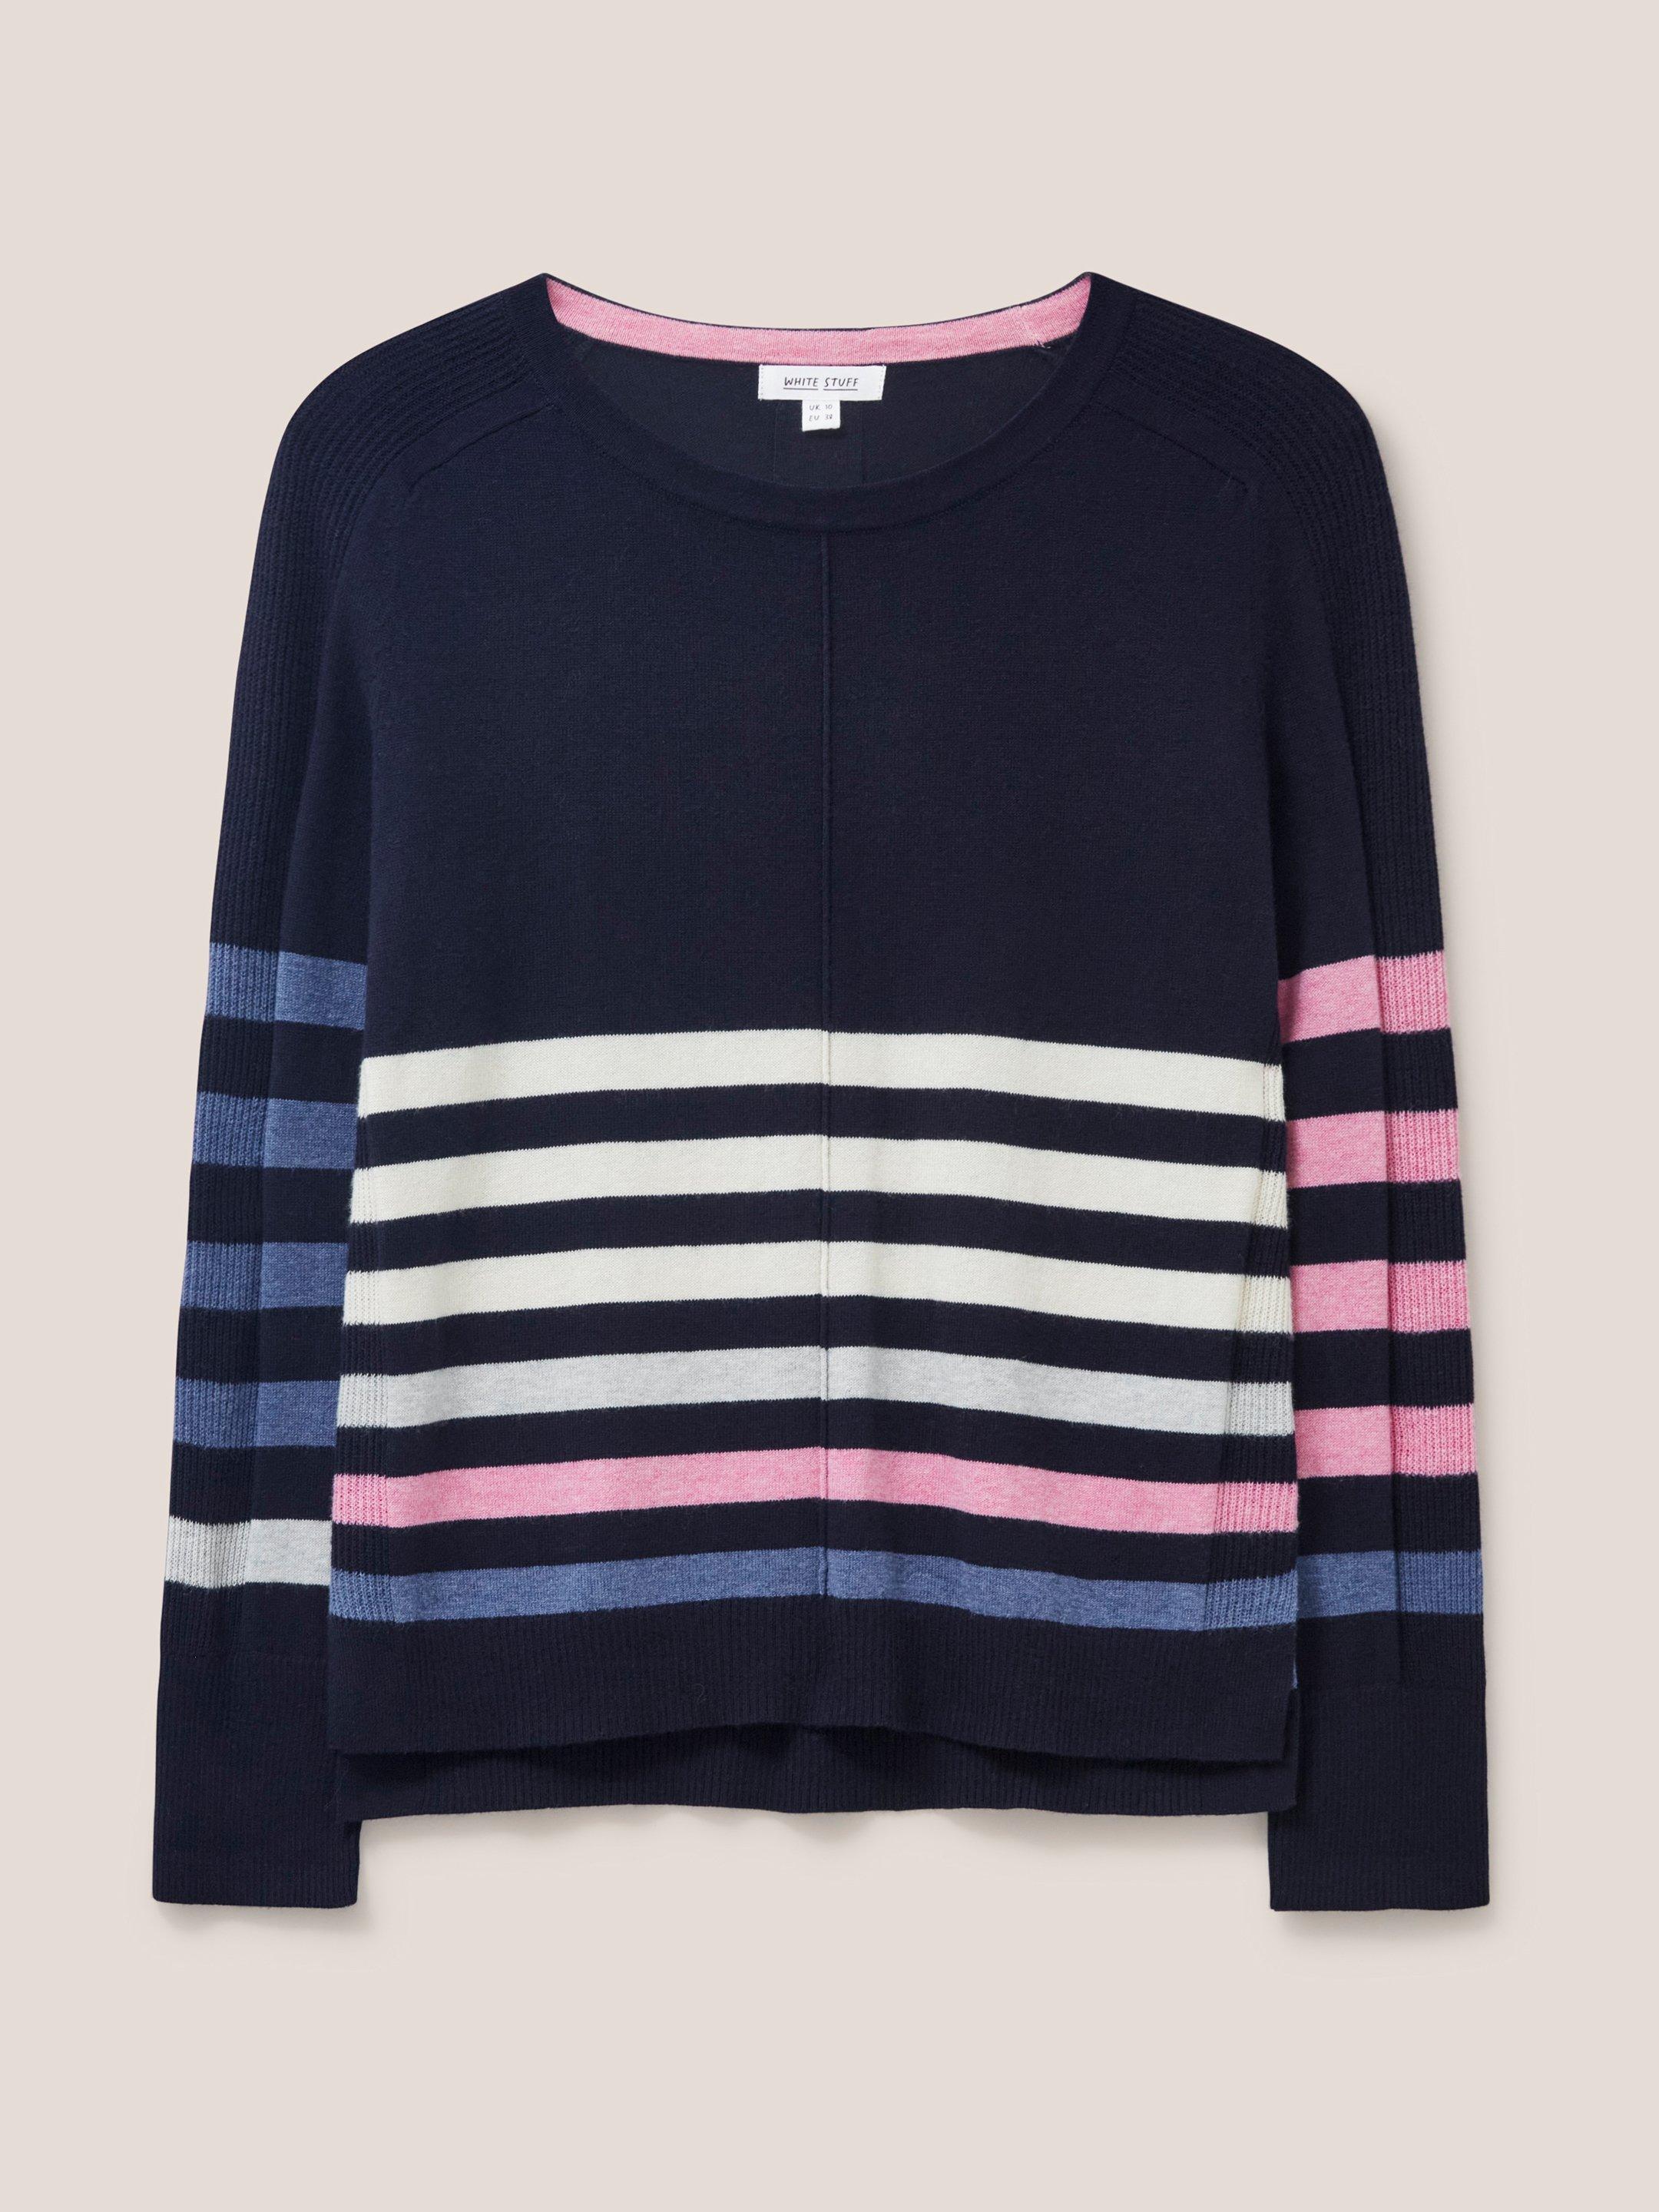 URBAN CASUAL JUMPER in NAVY MULTI - FLAT FRONT